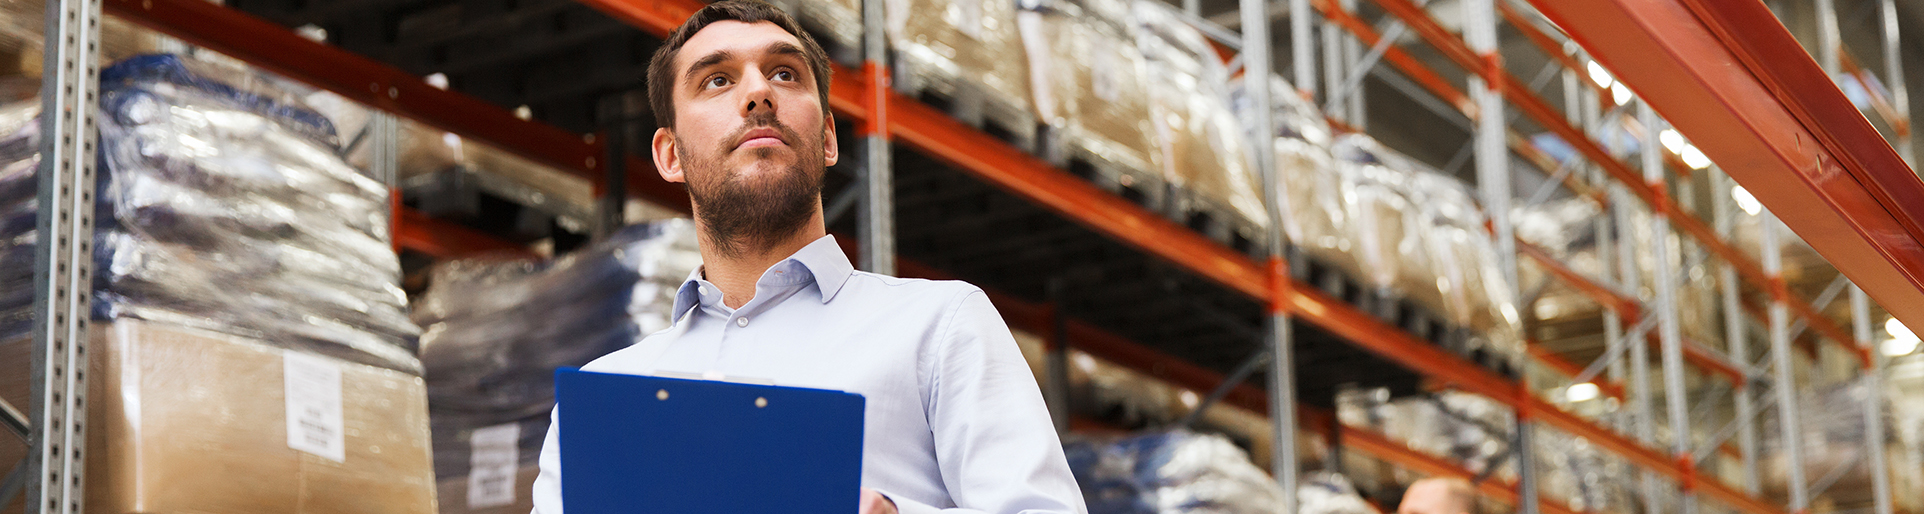 Ascendant Insurance Solutions provides a complete line of insurance products tailored for distributors and wholesalers, including coverages to protect businesses, employees, and customers.